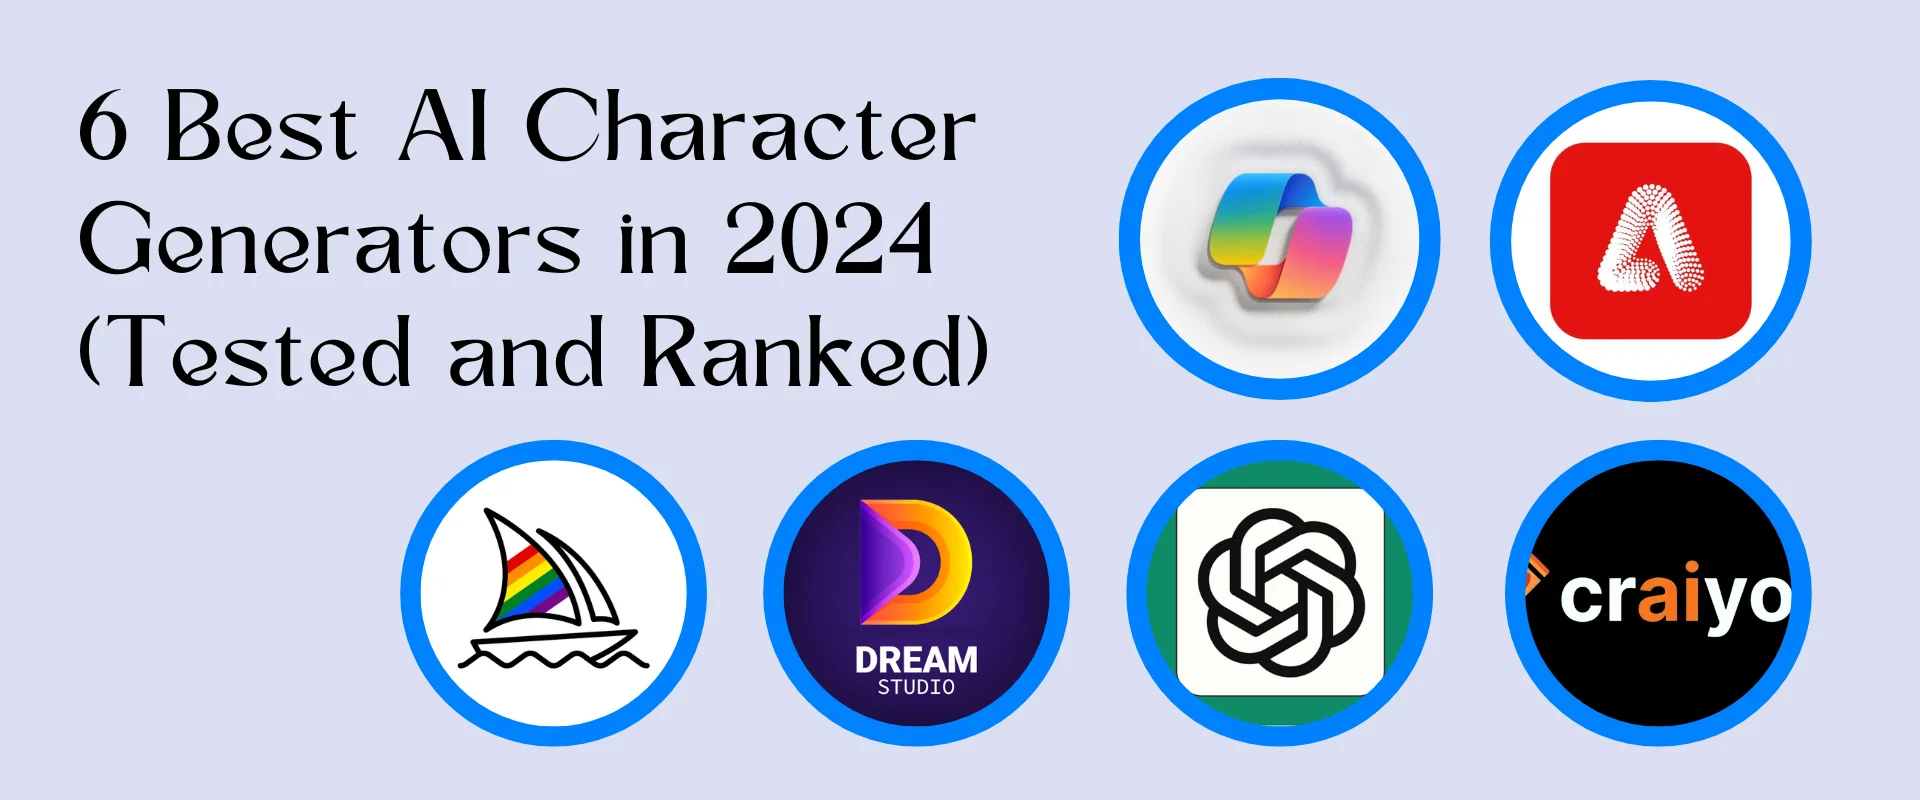 6 Best AI Character Generators in 2024 (Tested and Compared)